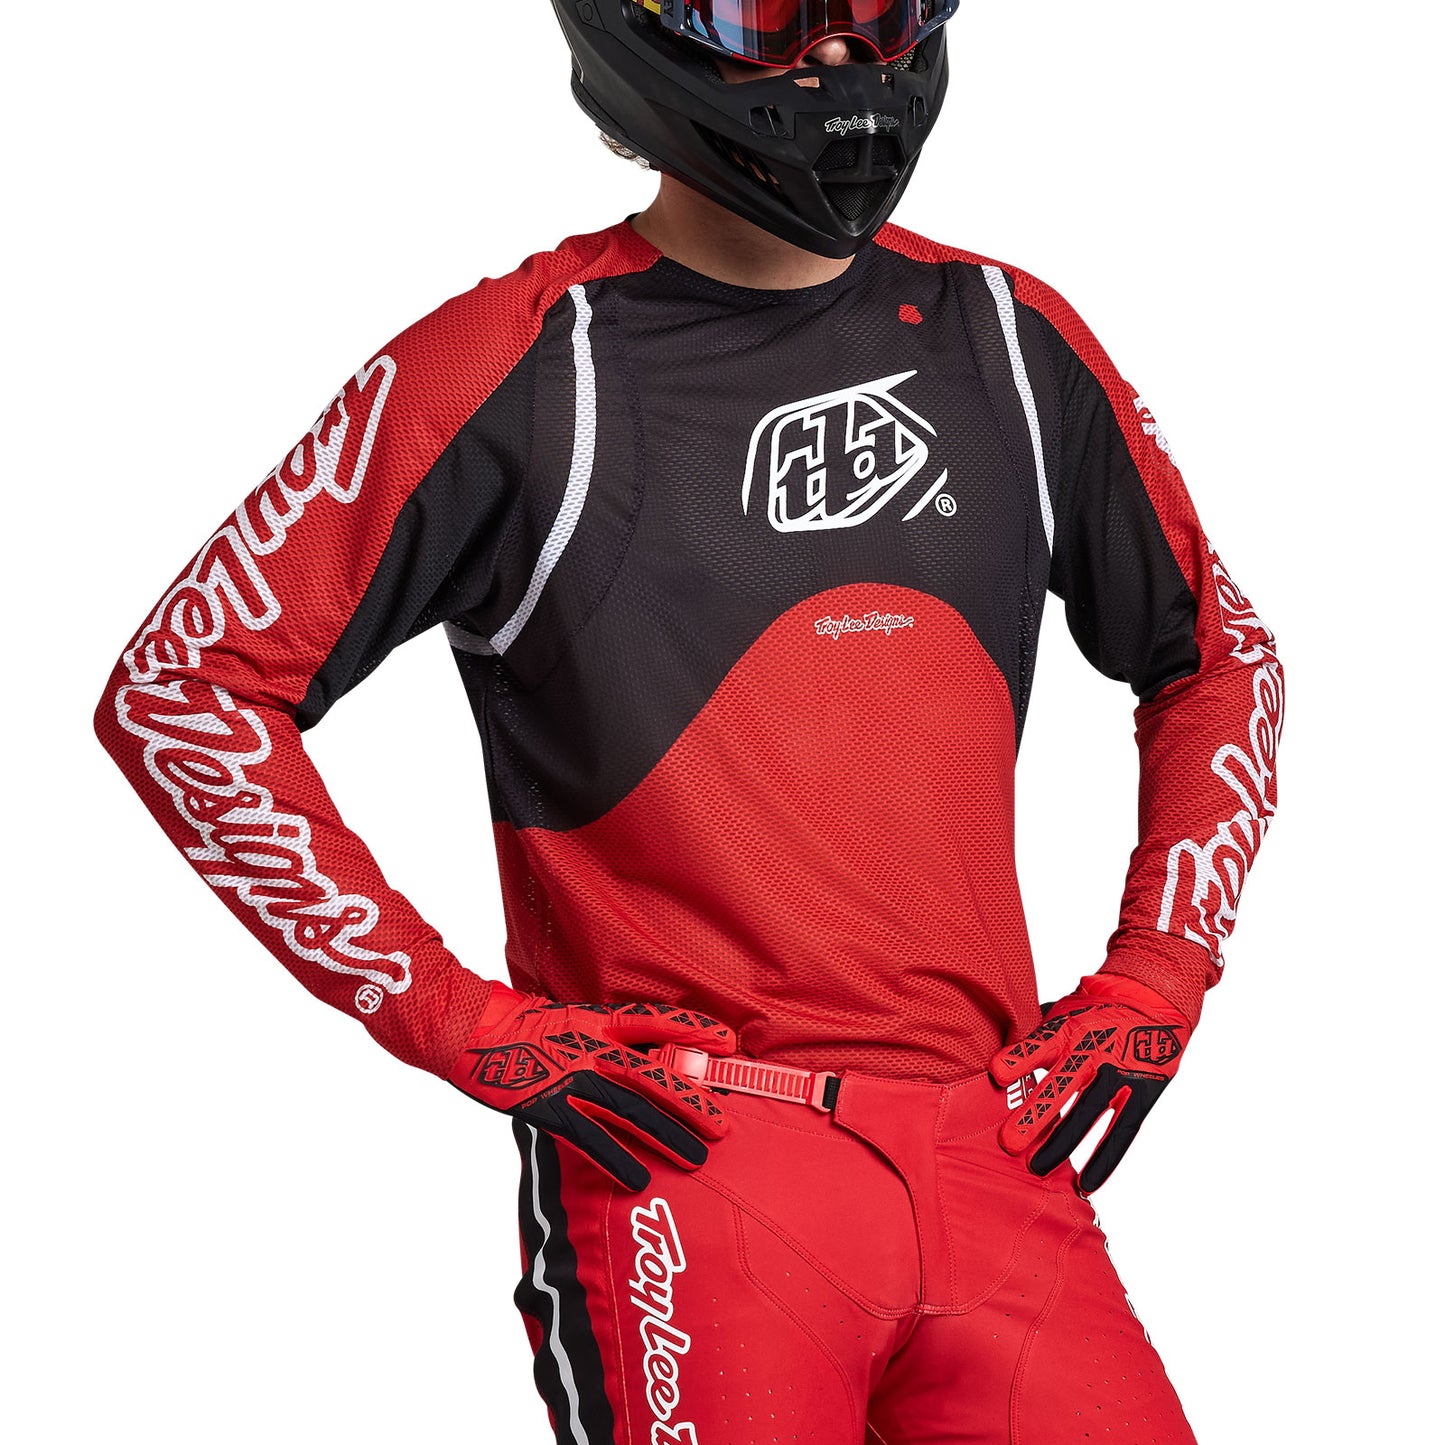 SE Pro Air Jersey Pinned Red